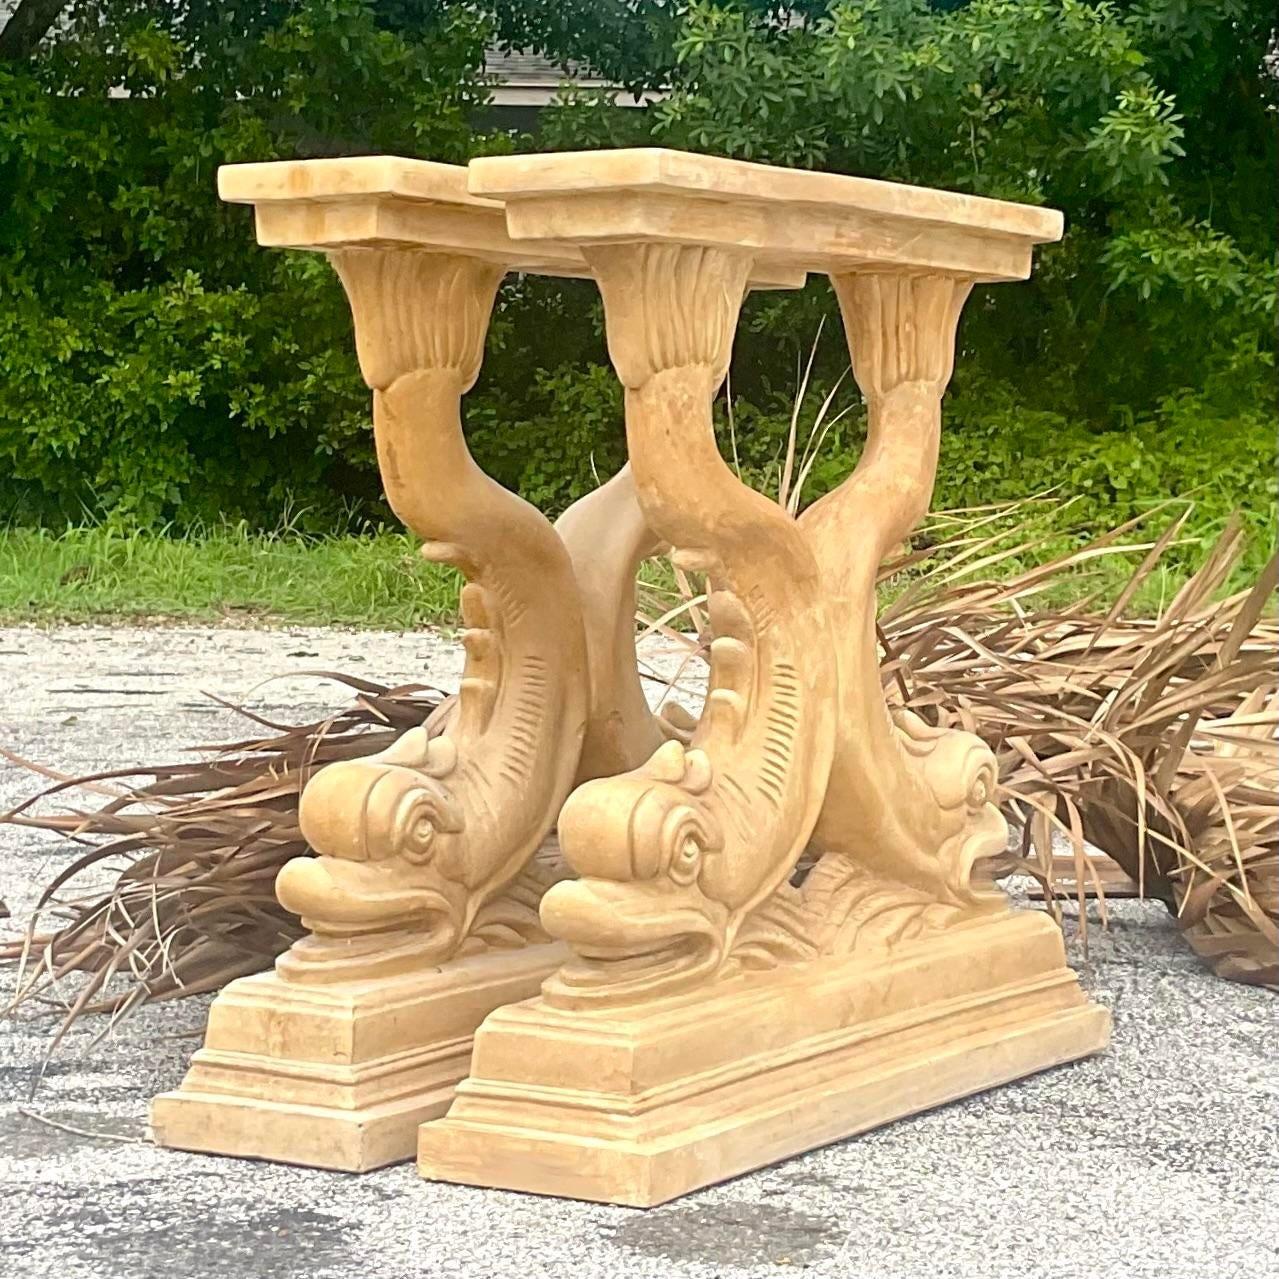 A stunning pair of vintage Plasters pedestals. A chic pair of dolphins in a warm gold color. Just add your favorite glass for a dining table or chic console table. Acquired from a Palm Beach estate.